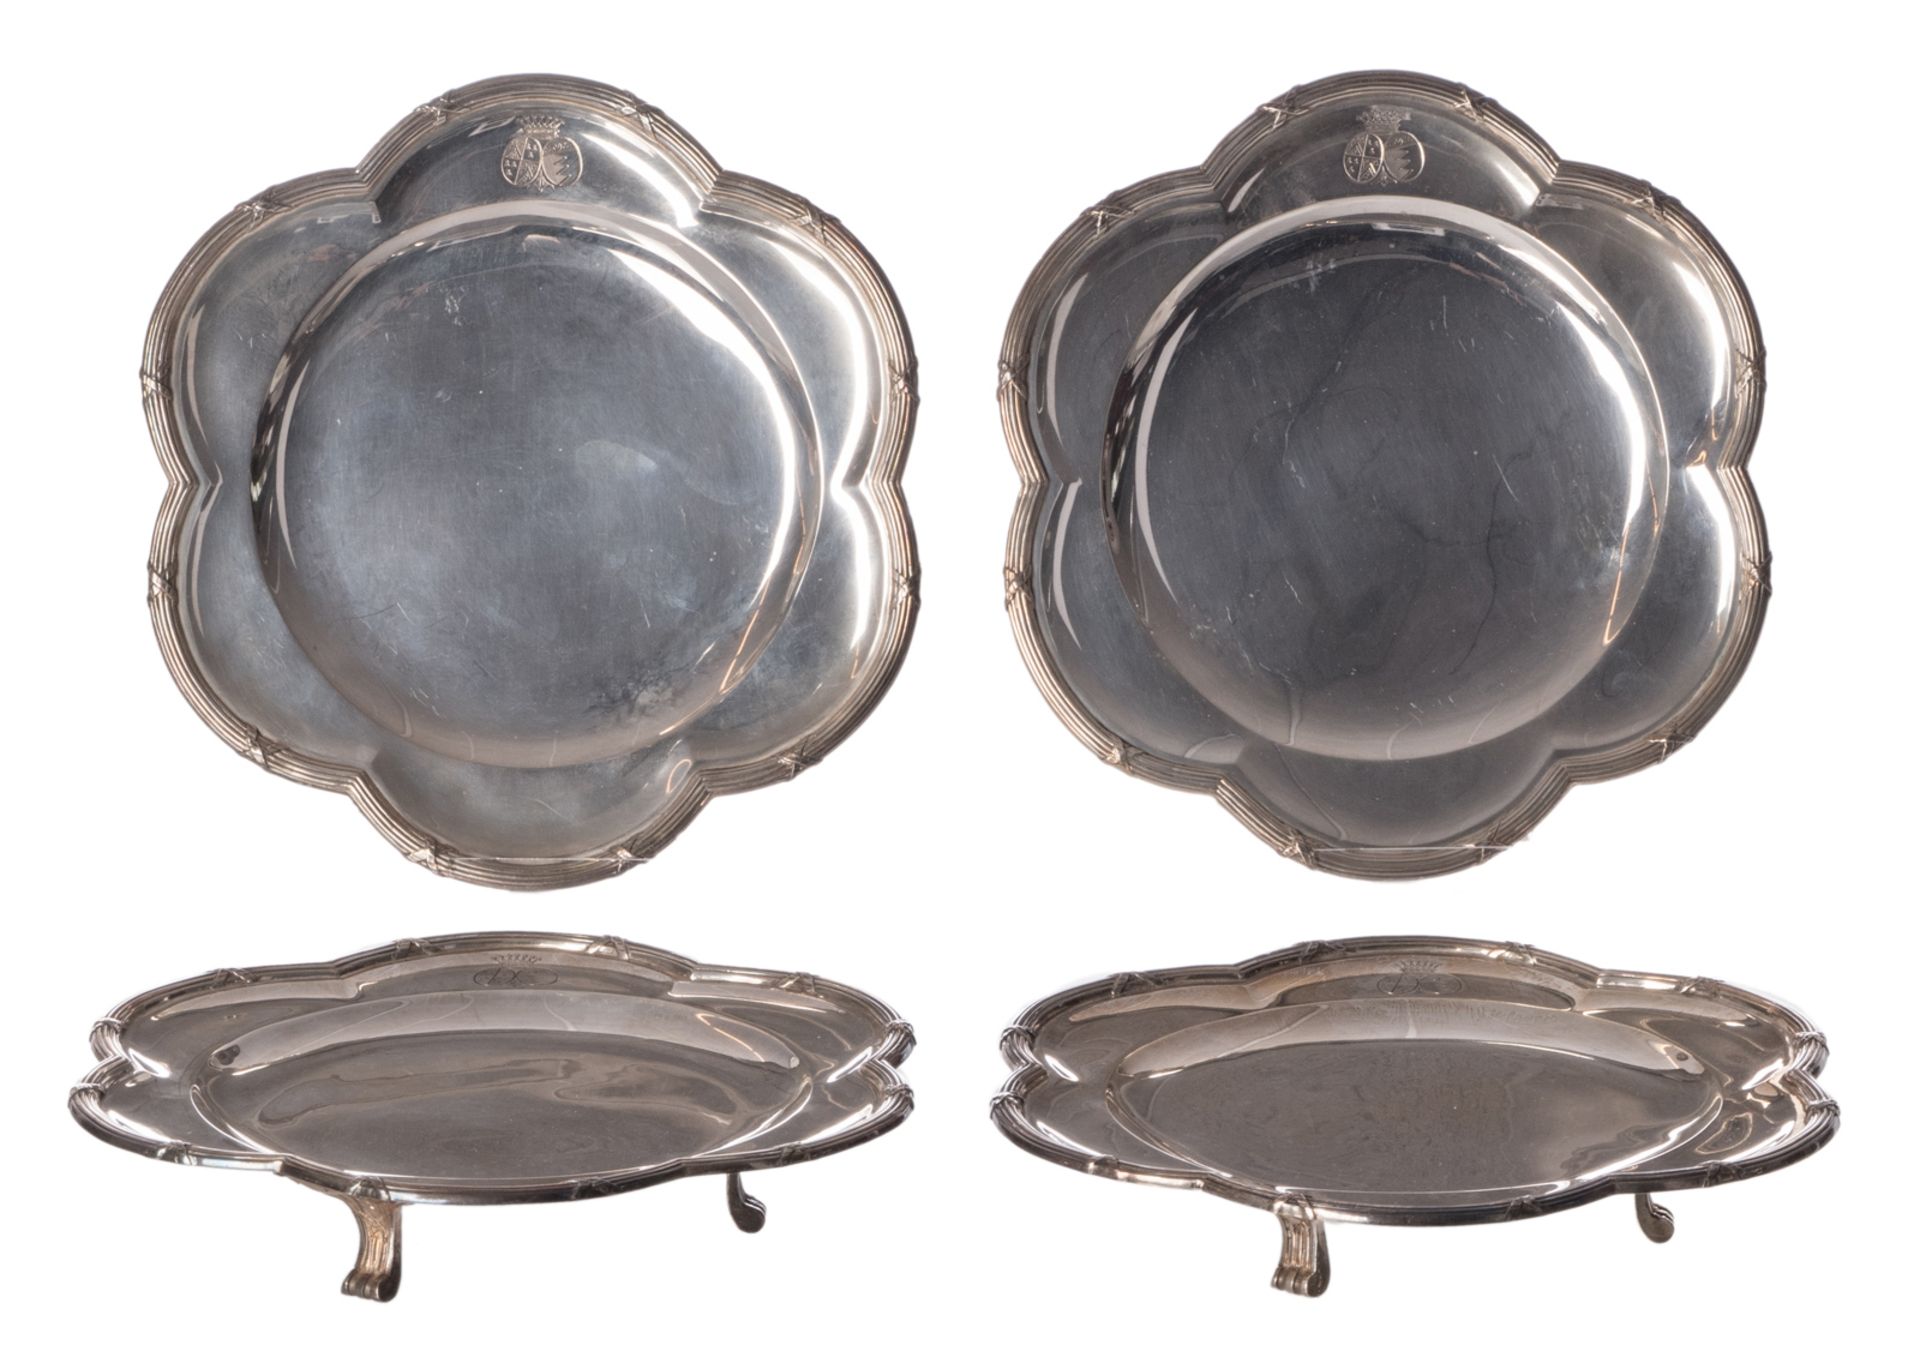 Four silver plates with six-lobed edges, silver purity 800/000, Belgium 1868-1942, maker's mark